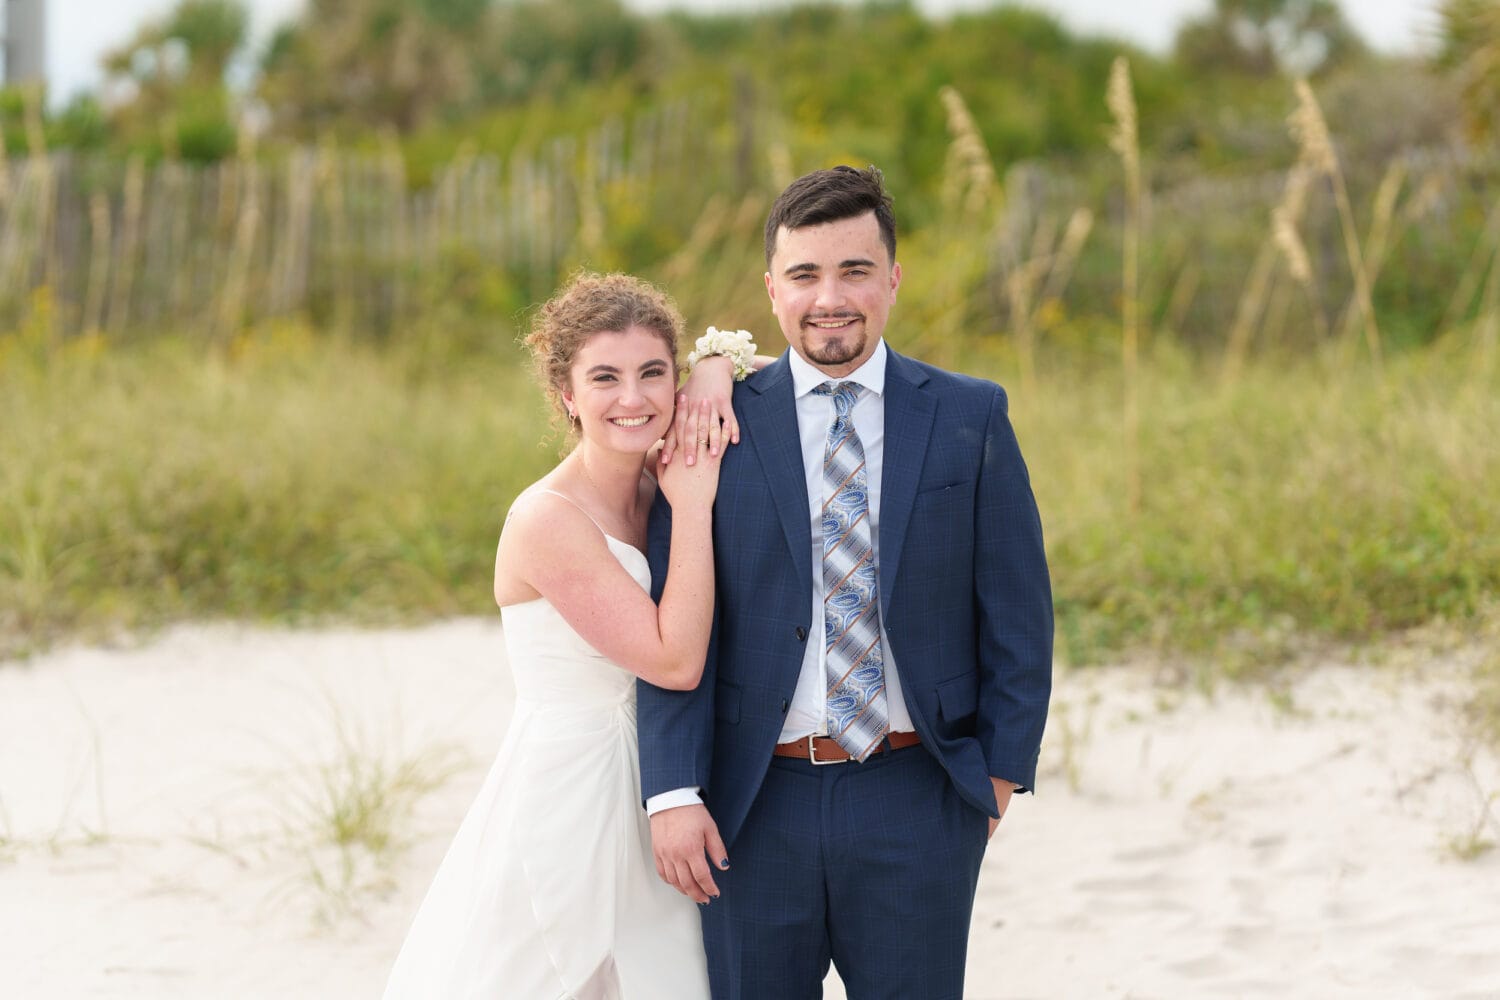 Cute pictures with the groom and his sister - Hilton Myrtle Beach Resort